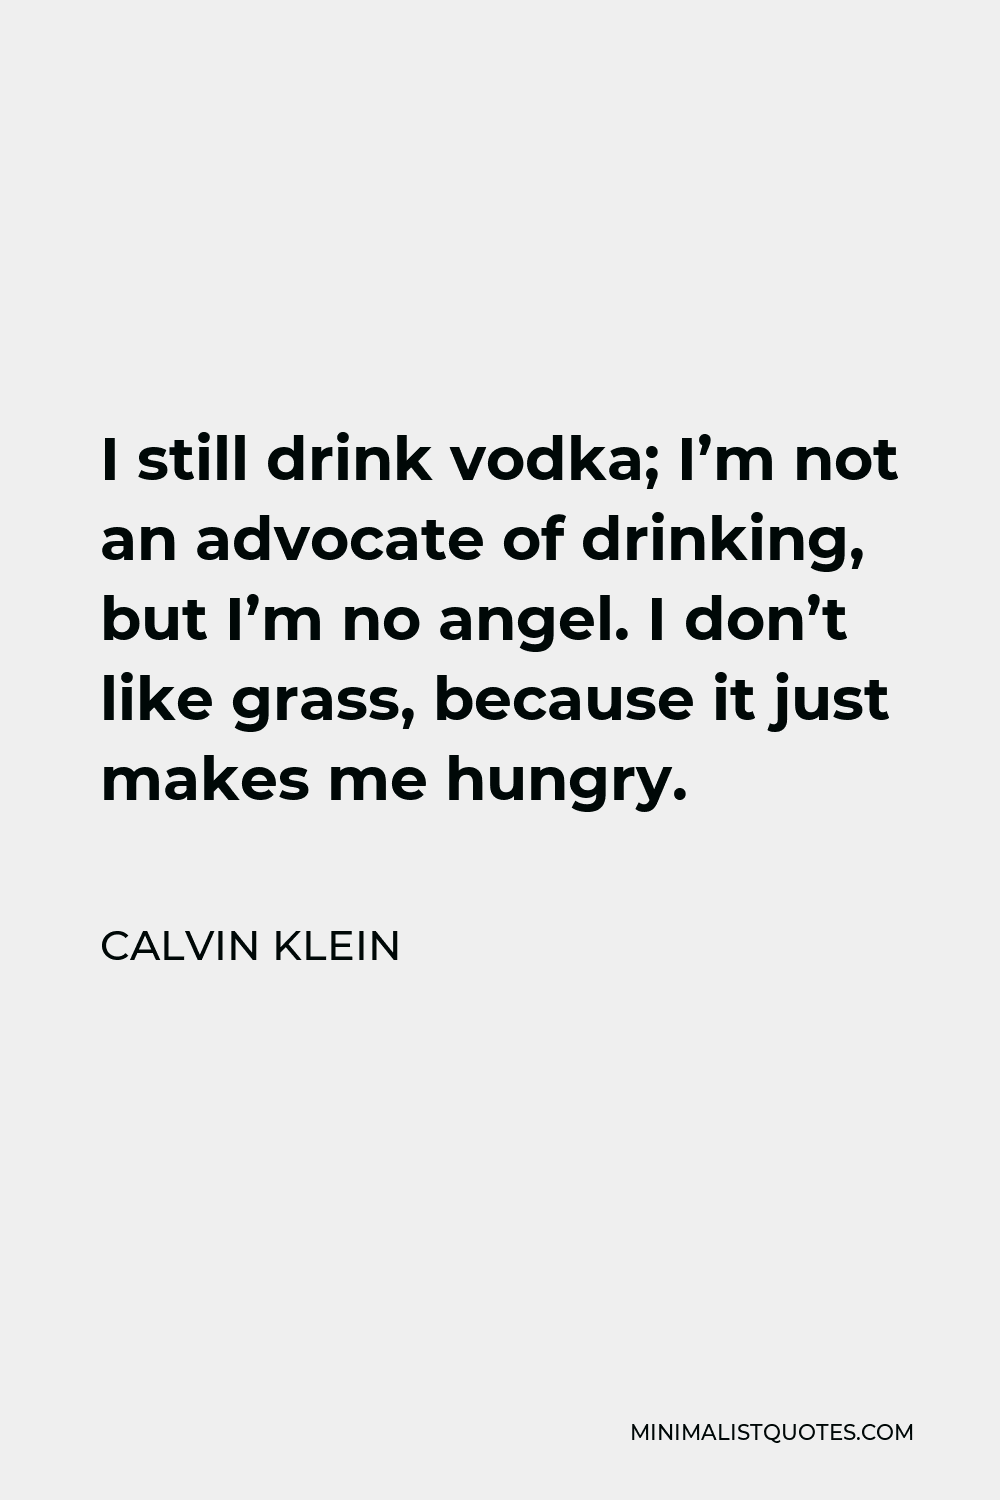 Calvin Klein Quote - I still drink vodka; I’m not an advocate of drinking, but I’m no angel. I don’t like grass, because it just makes me hungry.